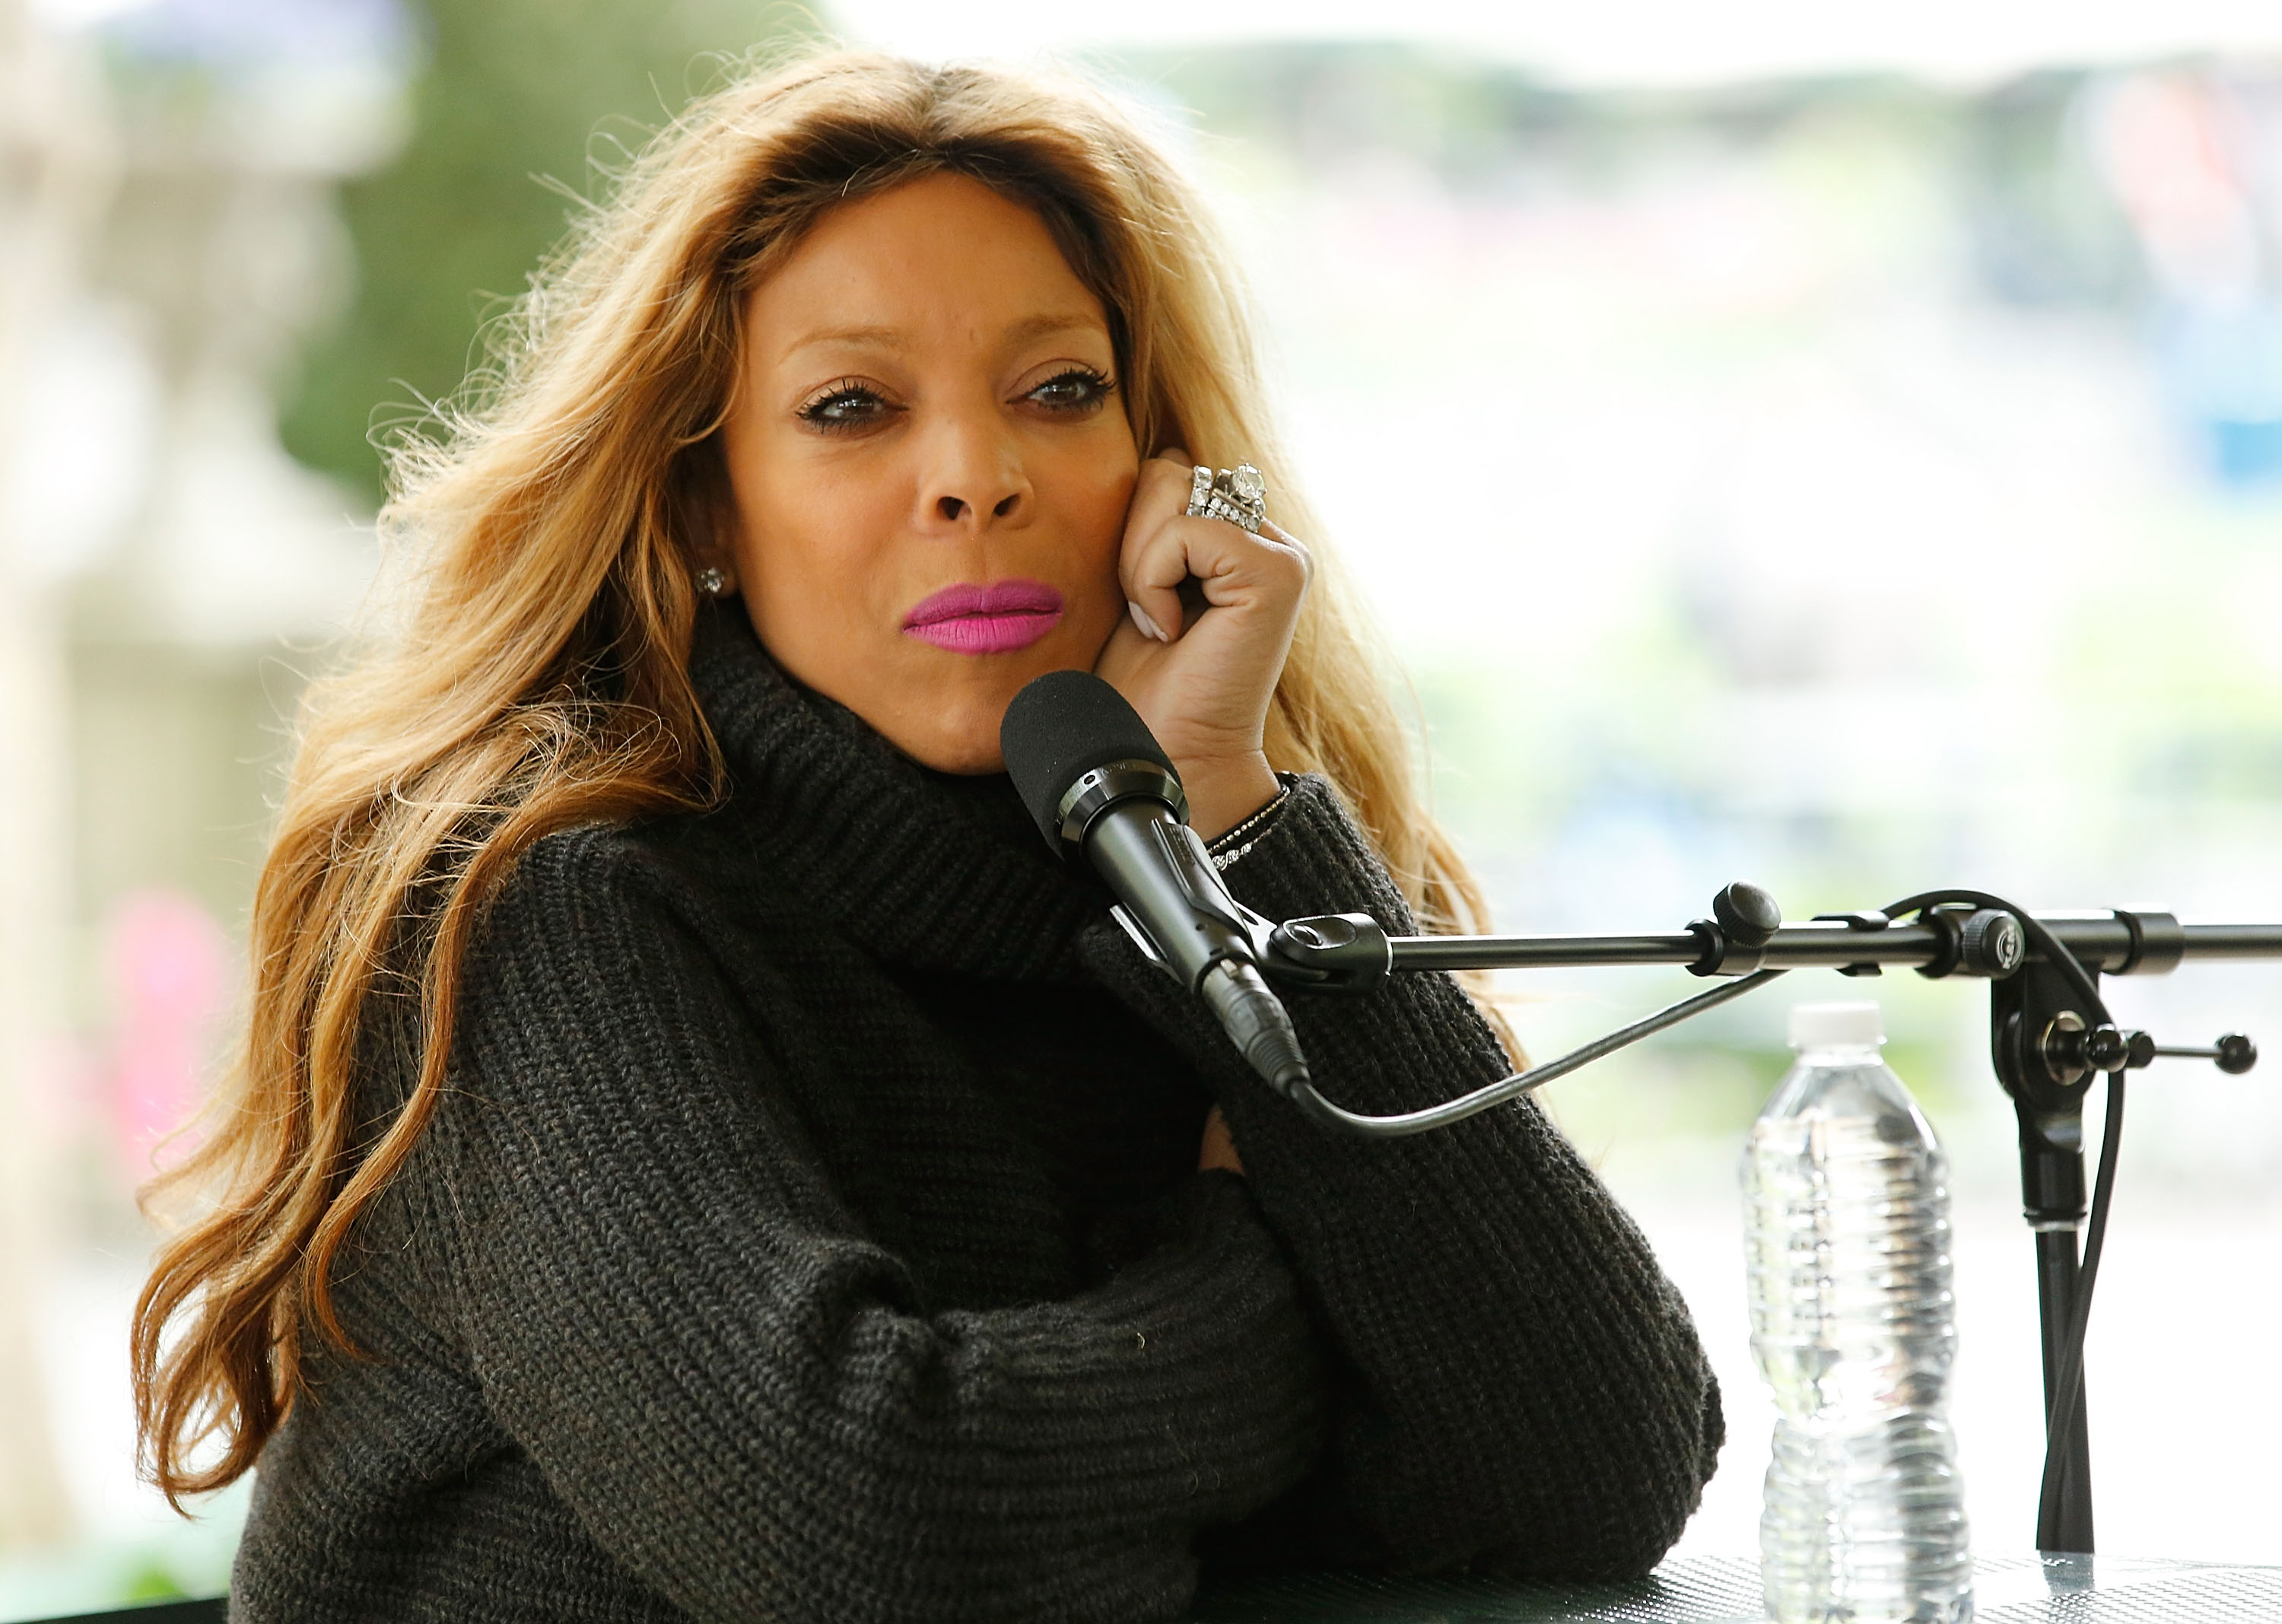 Media personality/author Wendy Williams speaks to the audience at The Bryant Park Reading Room on May 15, 2013, in New York City | Source: Getty Images